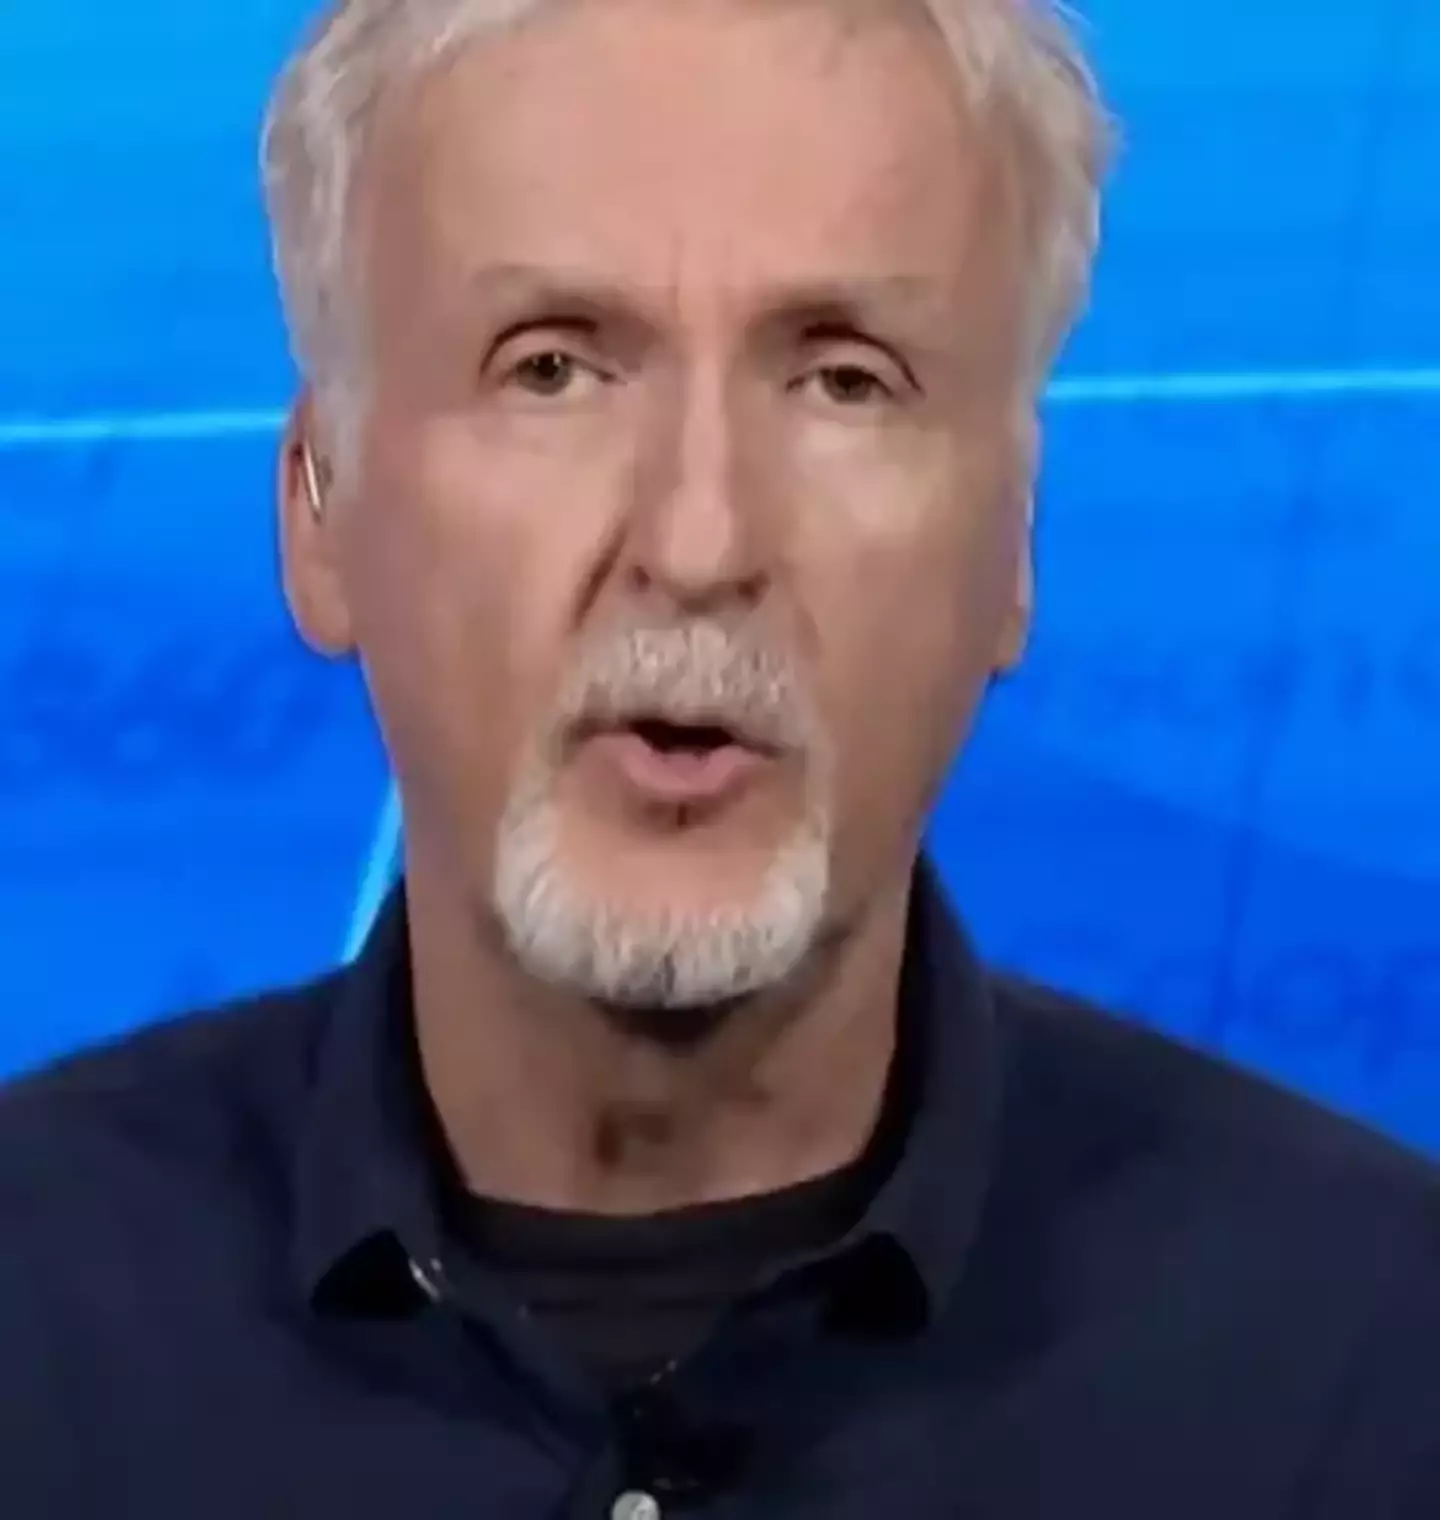 James Cameron revealed that he knew the sub had imploded on Monday.